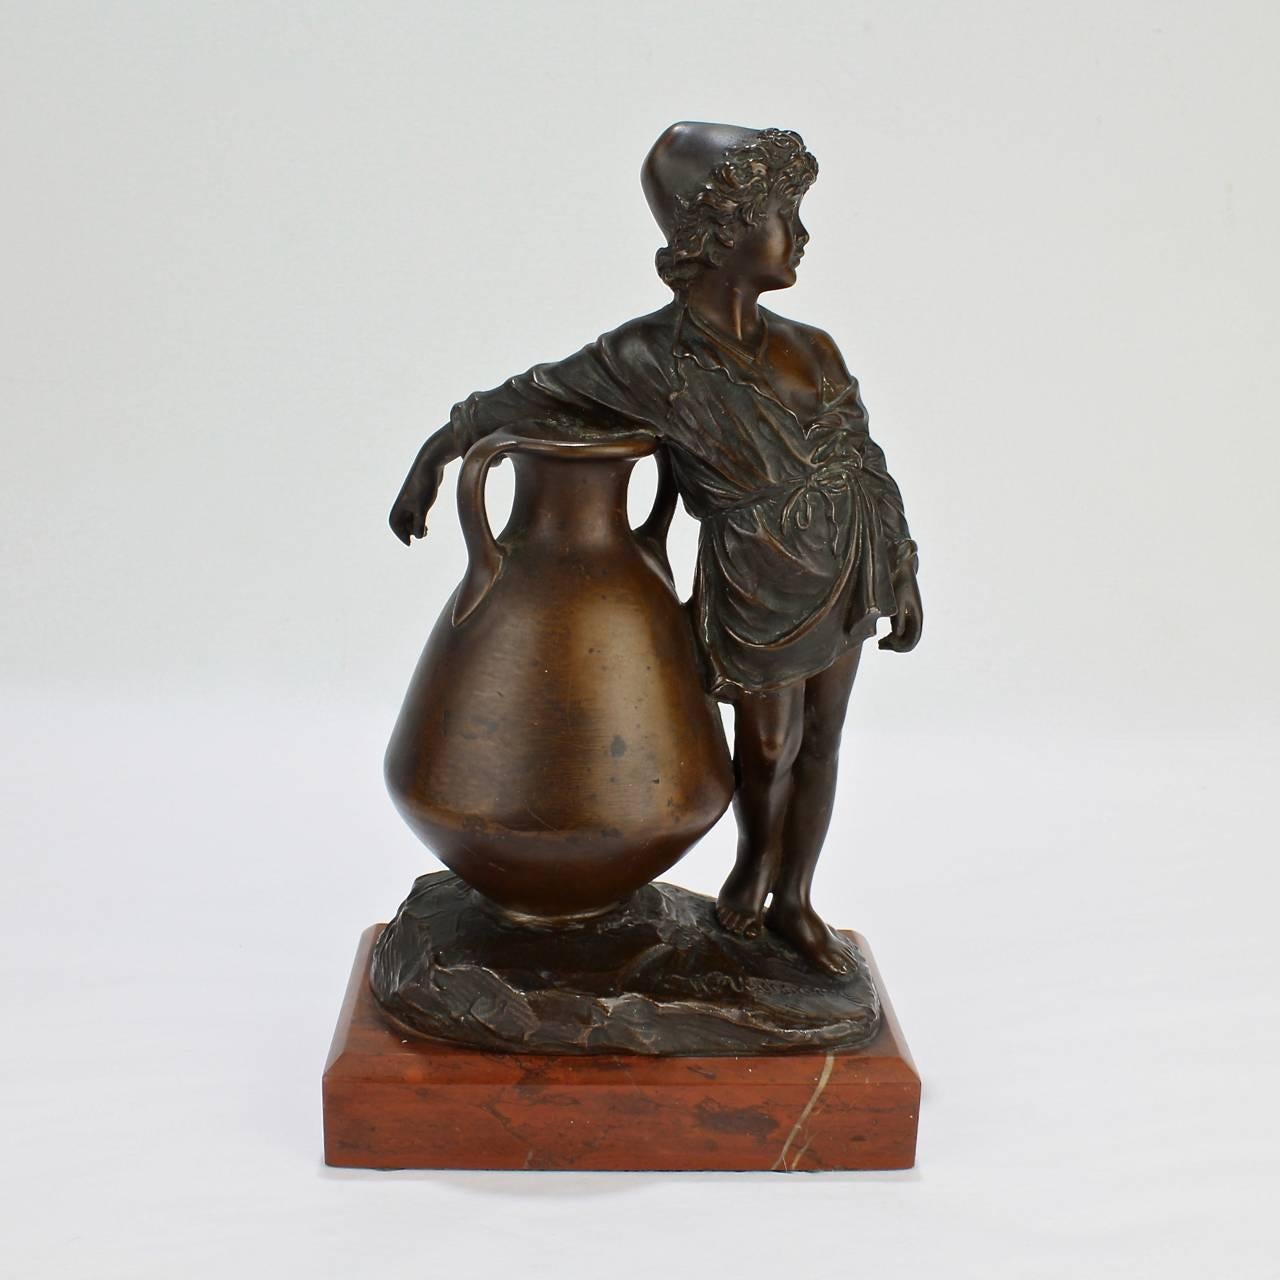 A good Belle Epoche bronze modeled as a young boy beside a large amphora or vase.

Stylistically informed by Orientalism and various Revival movements active in Europe at the end of the 19th century.

Mounted on a rouge marble base.

Base